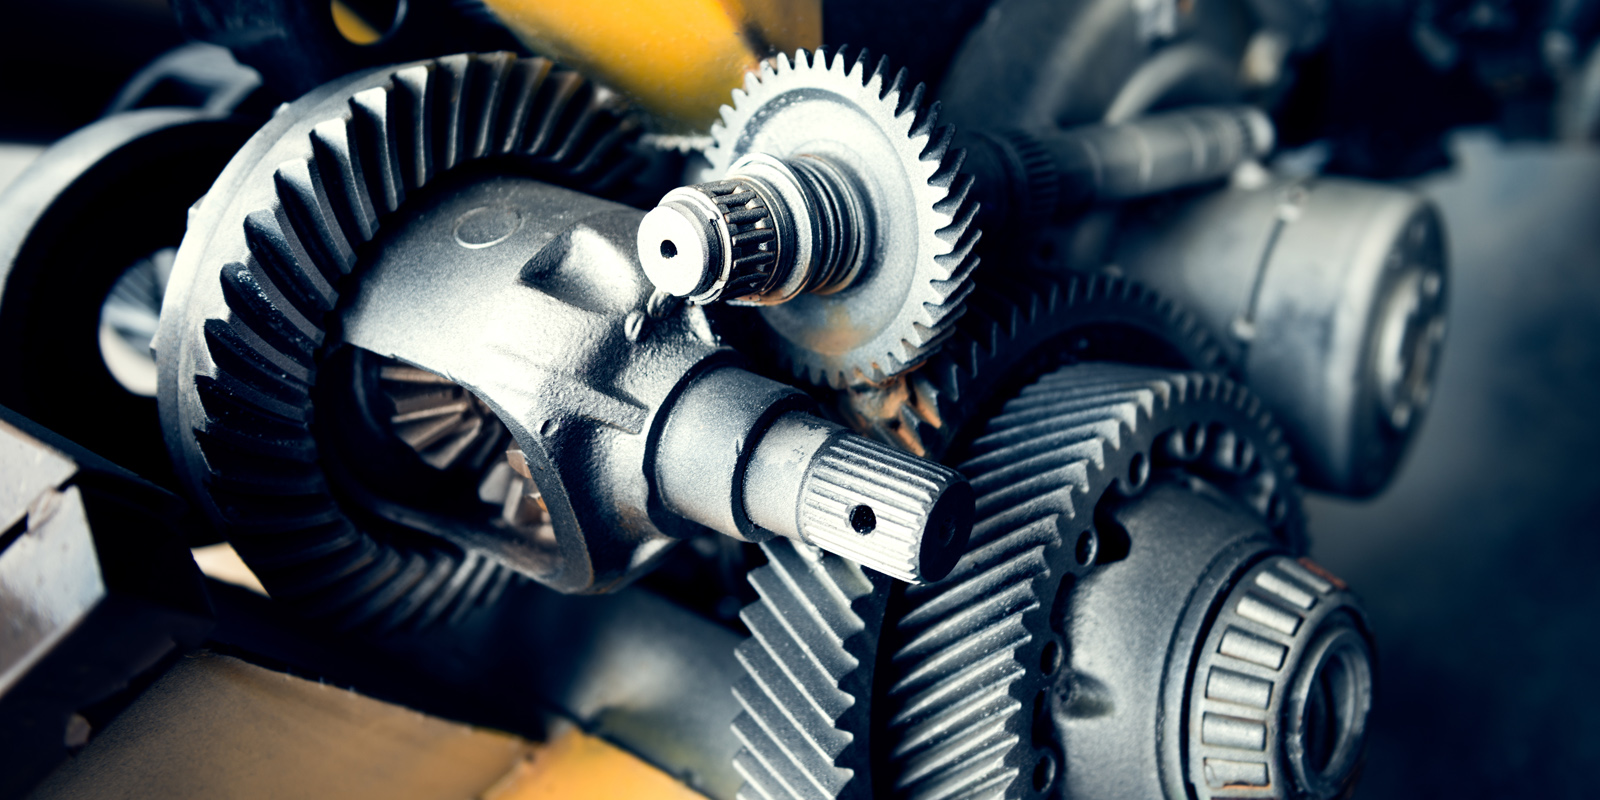 Image of Machines and Gear Wheels